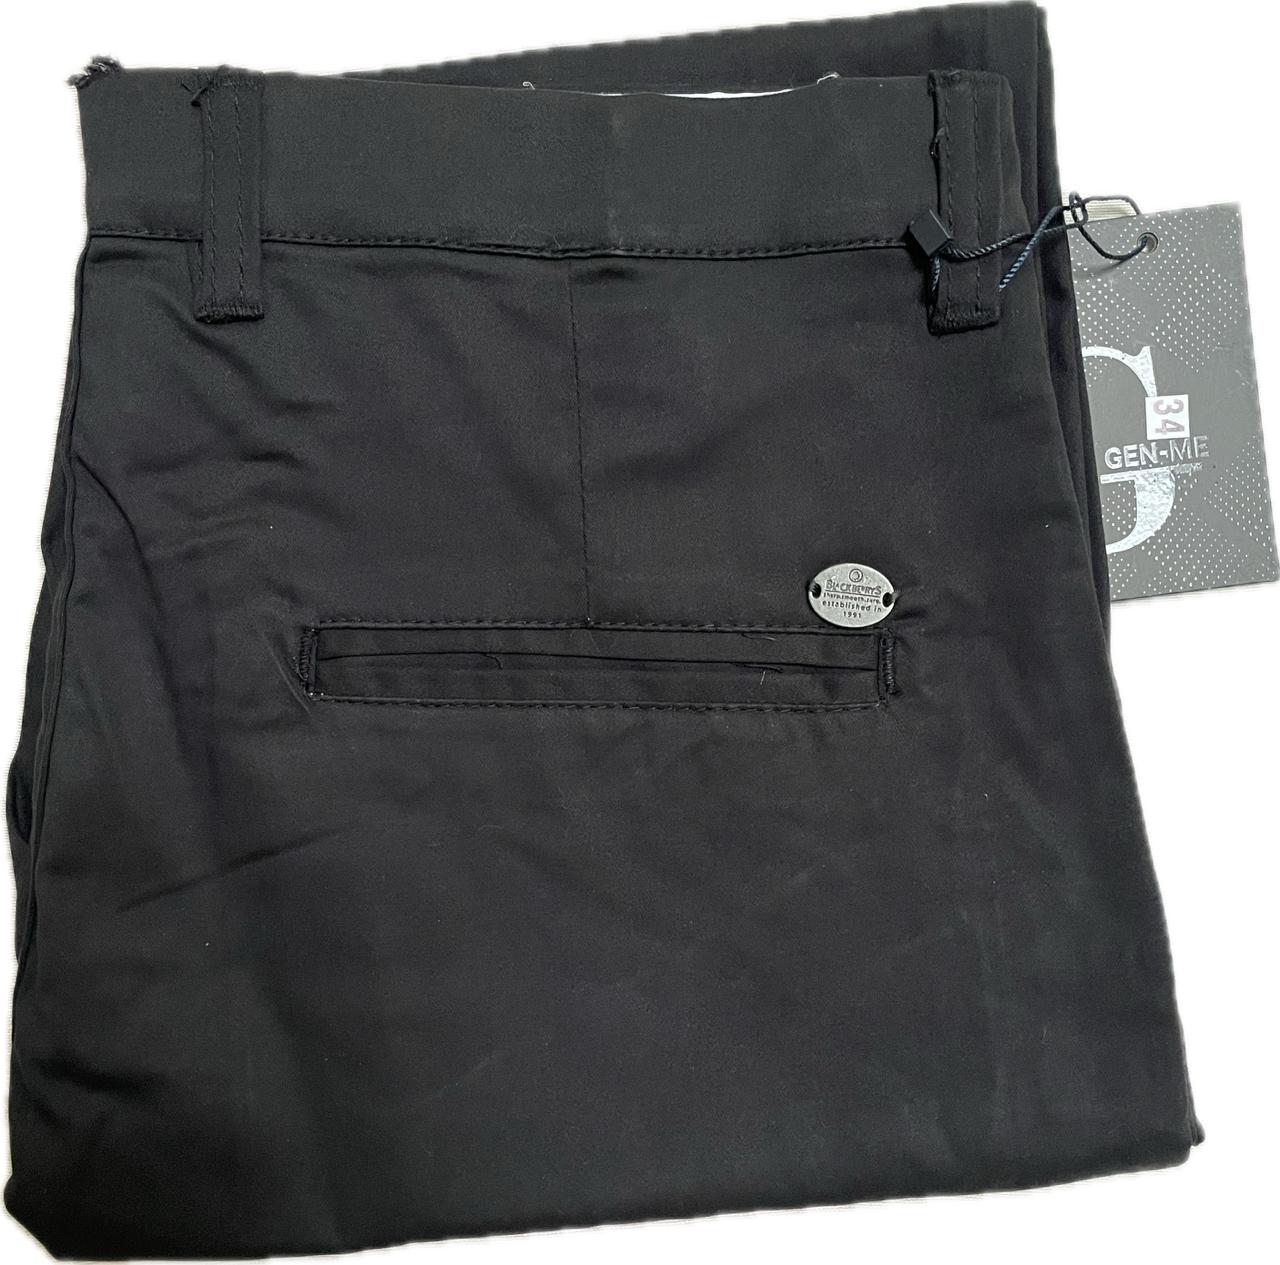 Black Cotton Trouser with stretchable